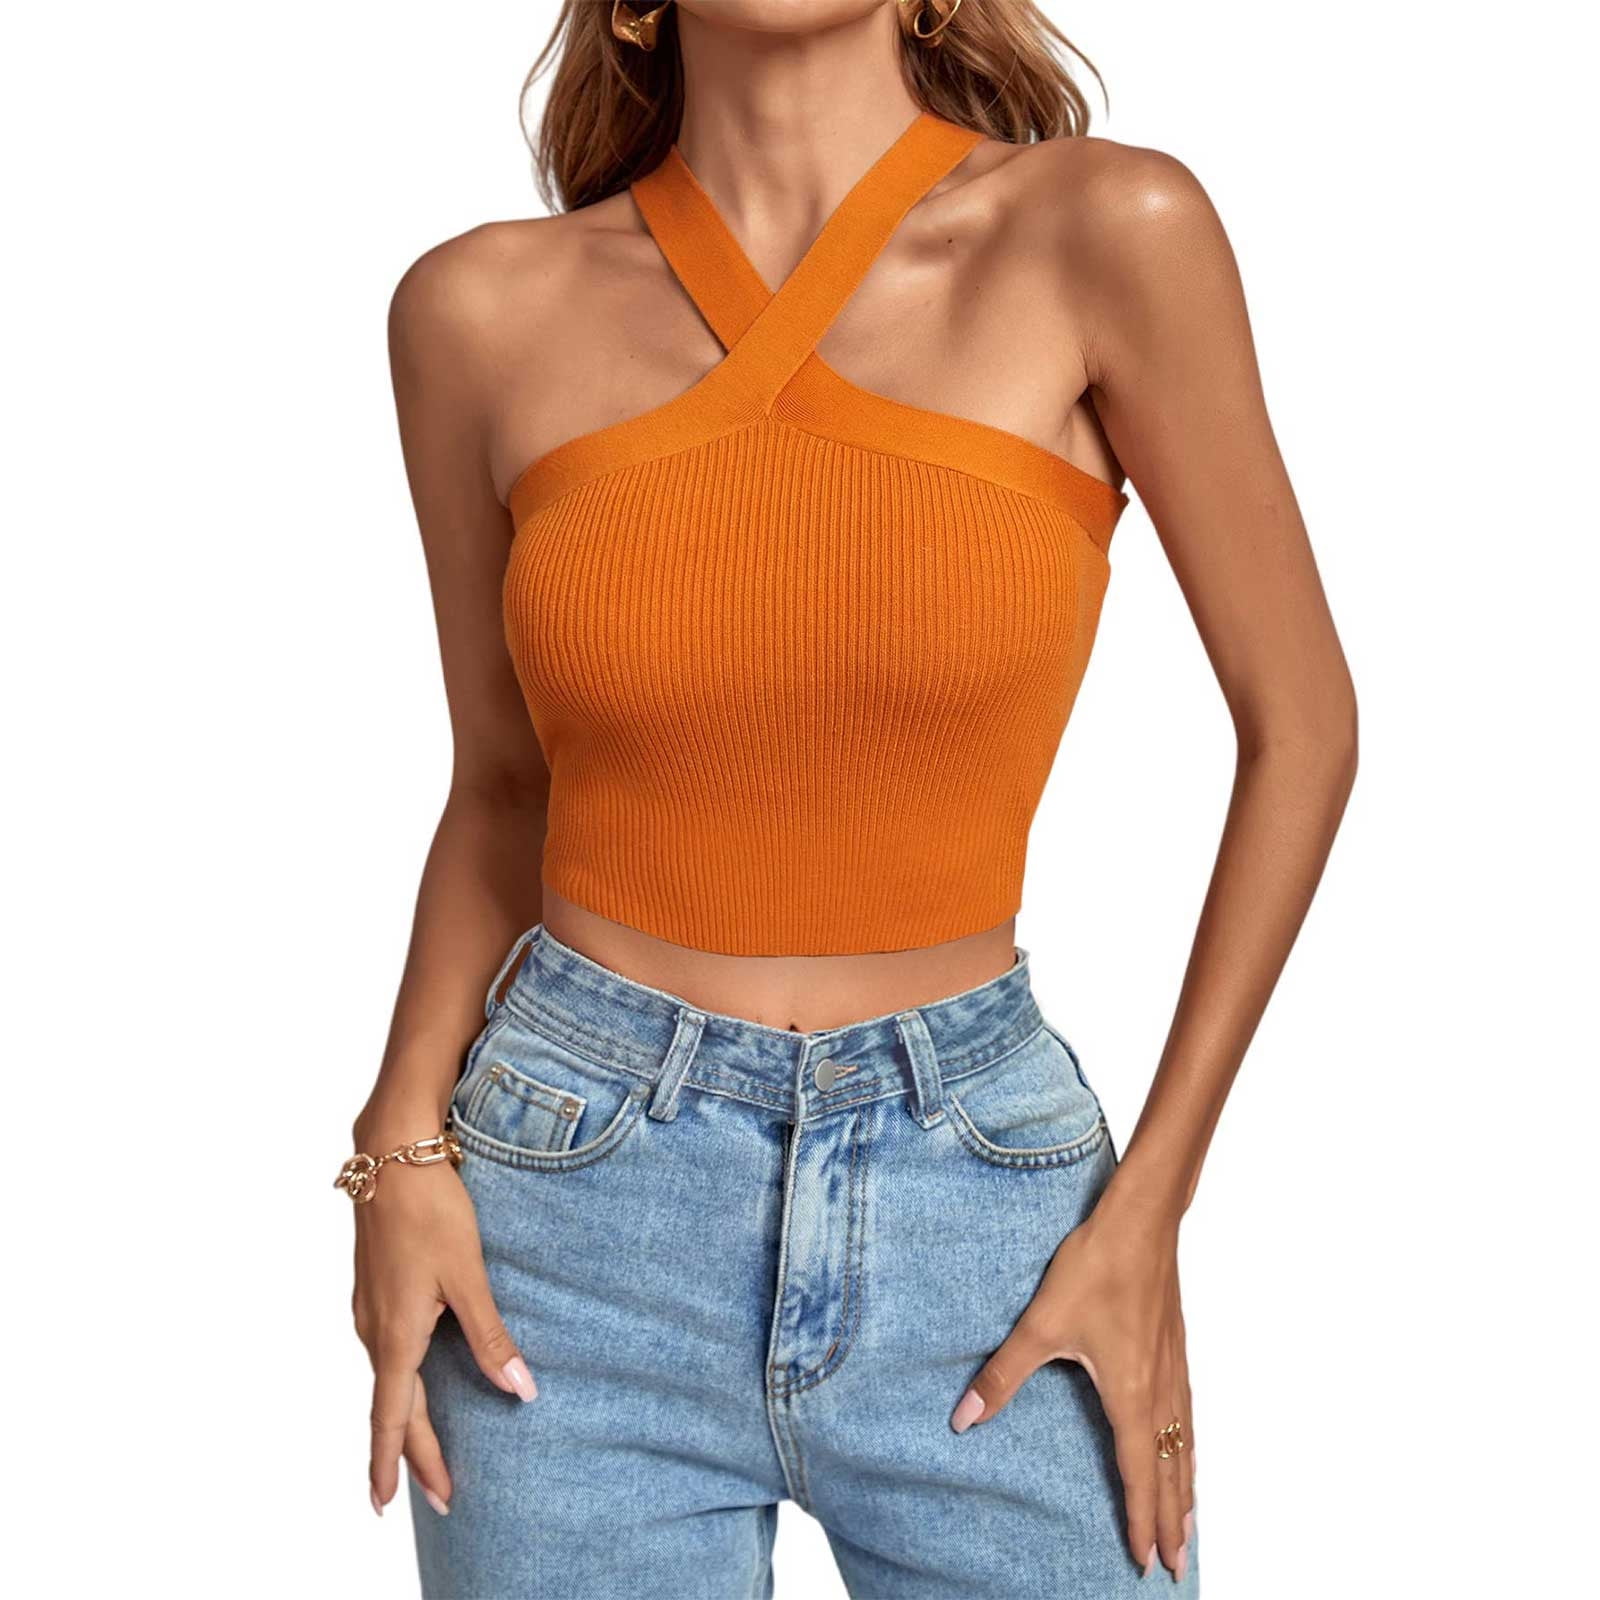 Summer Chic: Womens Halter One Shoulder Cross Bra Top Solid Color Cropped  Sleeveless Top For Various Fashion Styles Mujer Verano 210709 From Cong02,  $10.76